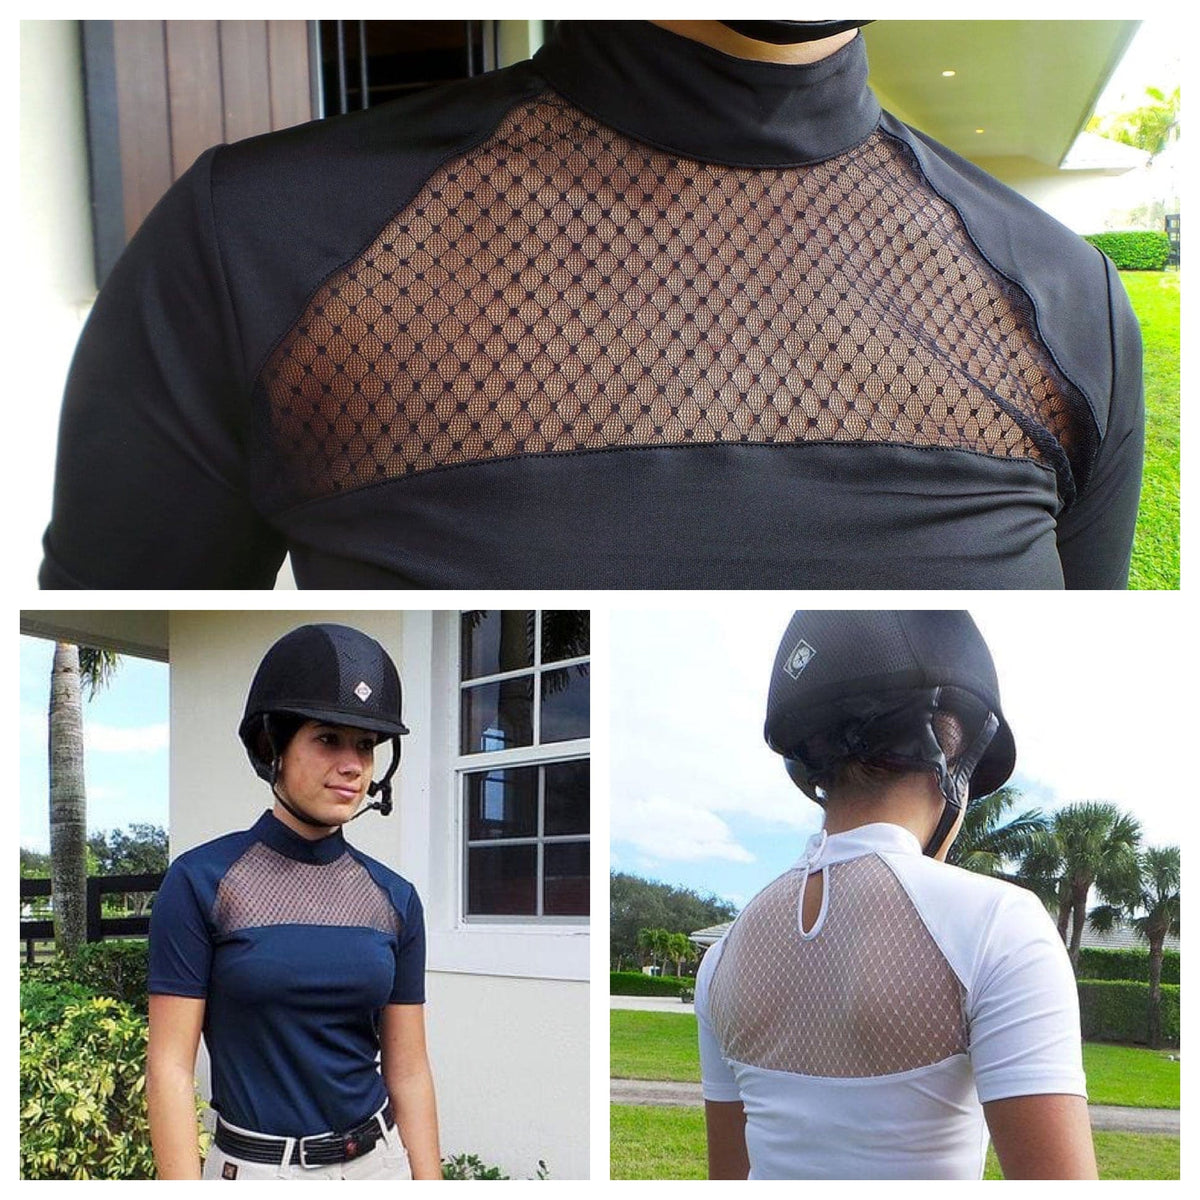 Equisite Elements of Style Show Shirt Equisite Elements- Carina Show Shirt equestrian team apparel online tack store mobile tack store custom farm apparel custom show stable clothing equestrian lifestyle horse show clothing riding clothes horses equestrian tack store